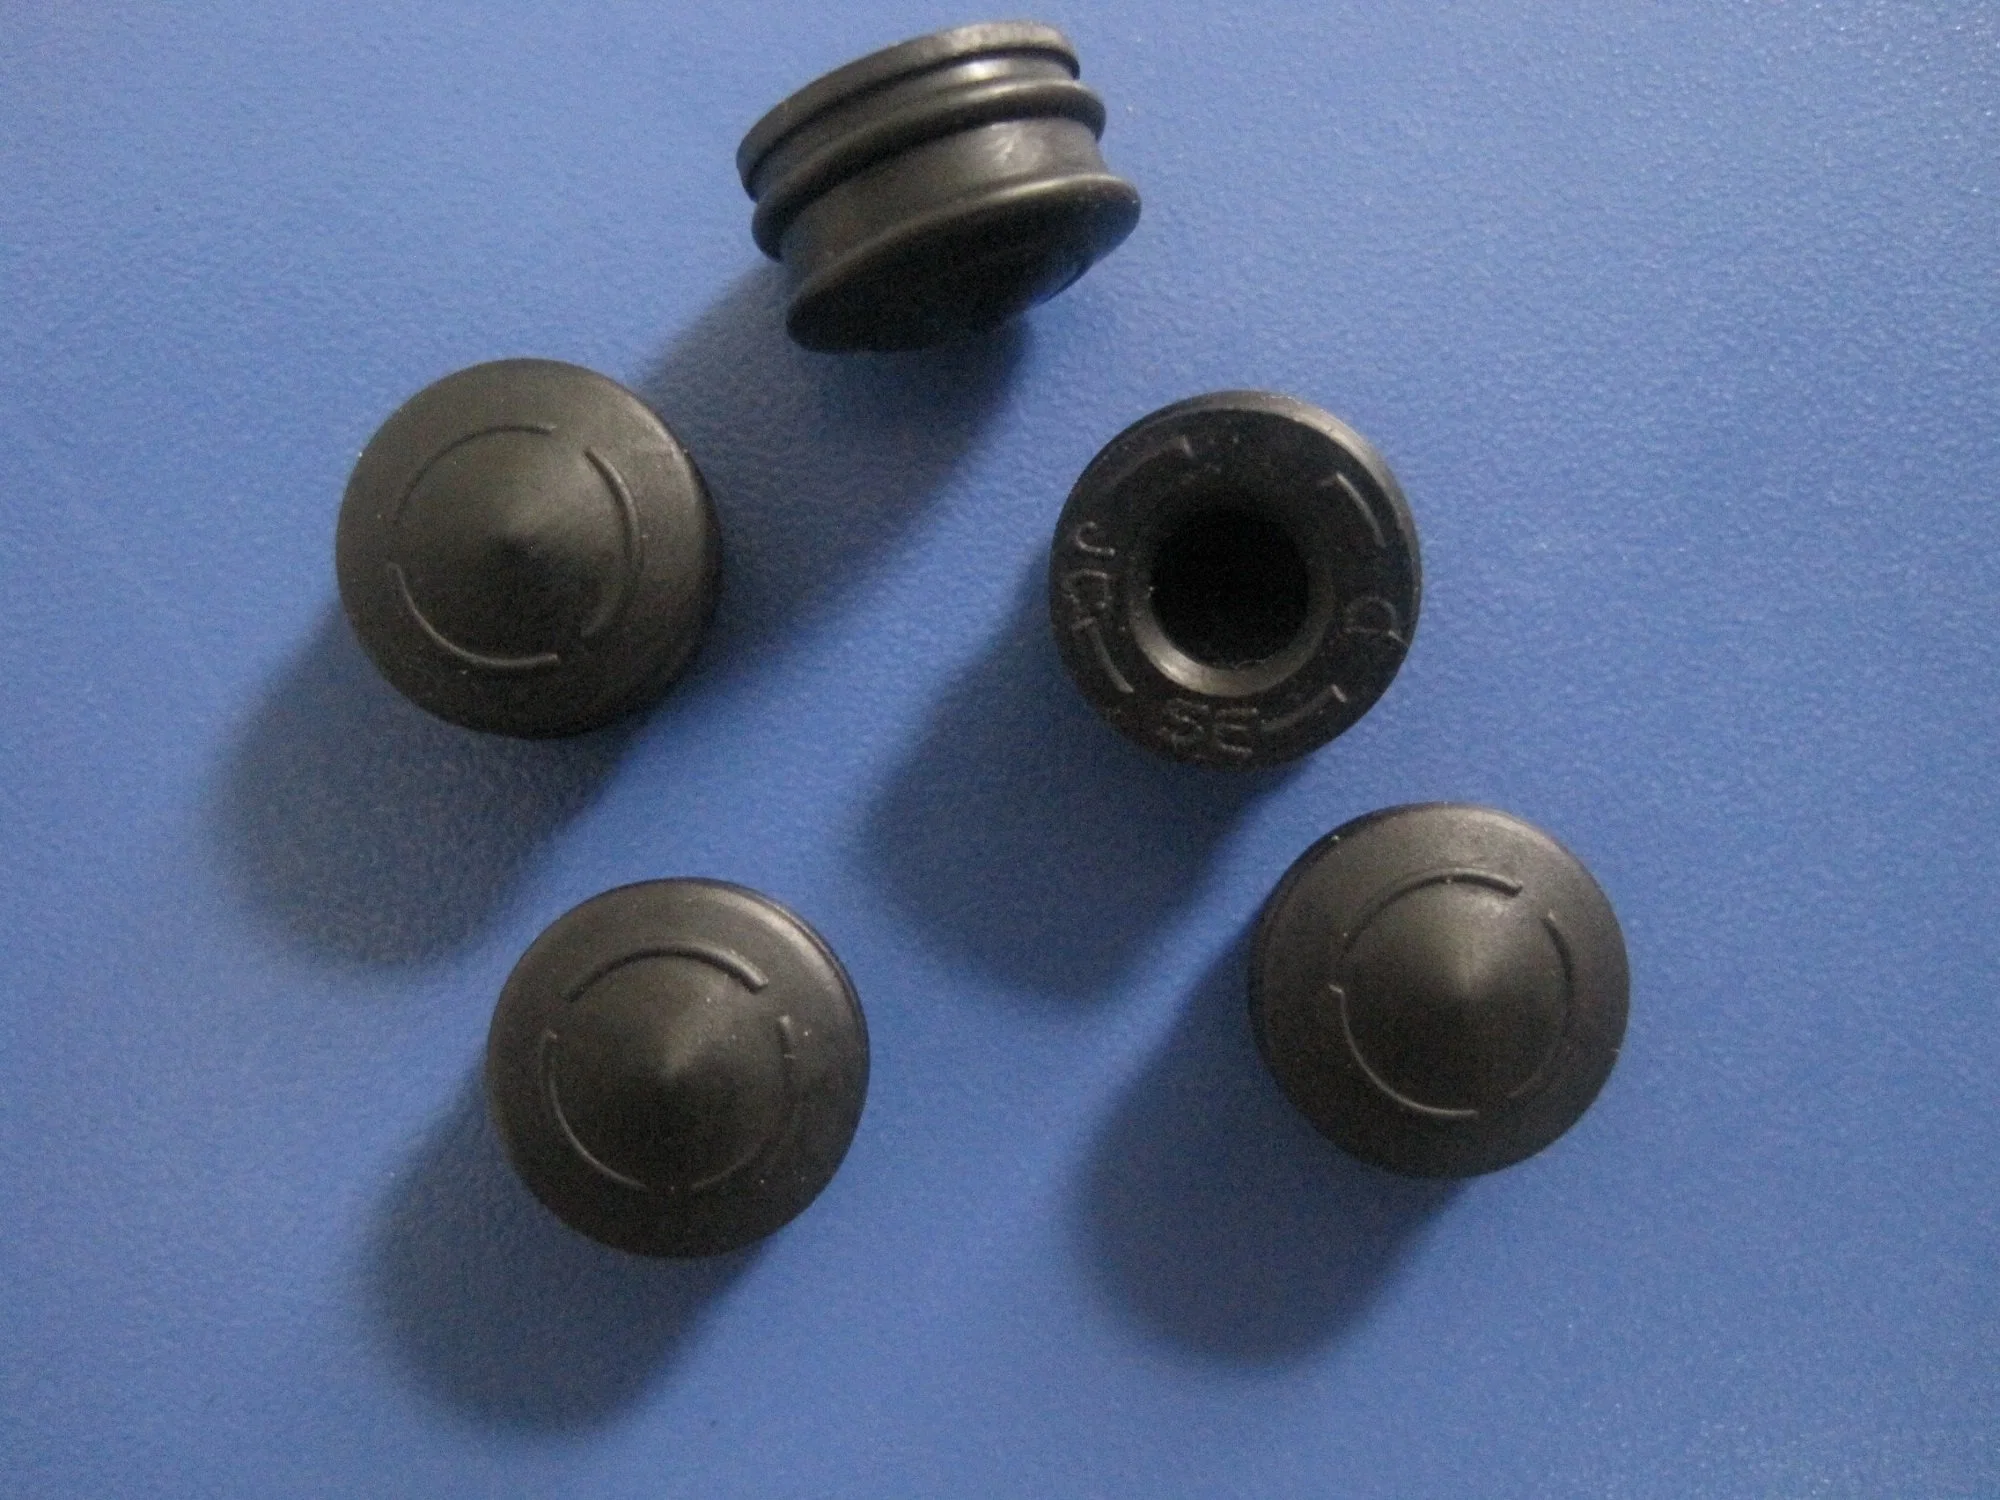 Medical Rubber Stopper with Plastic Cap for The Blood Collection Test Tube